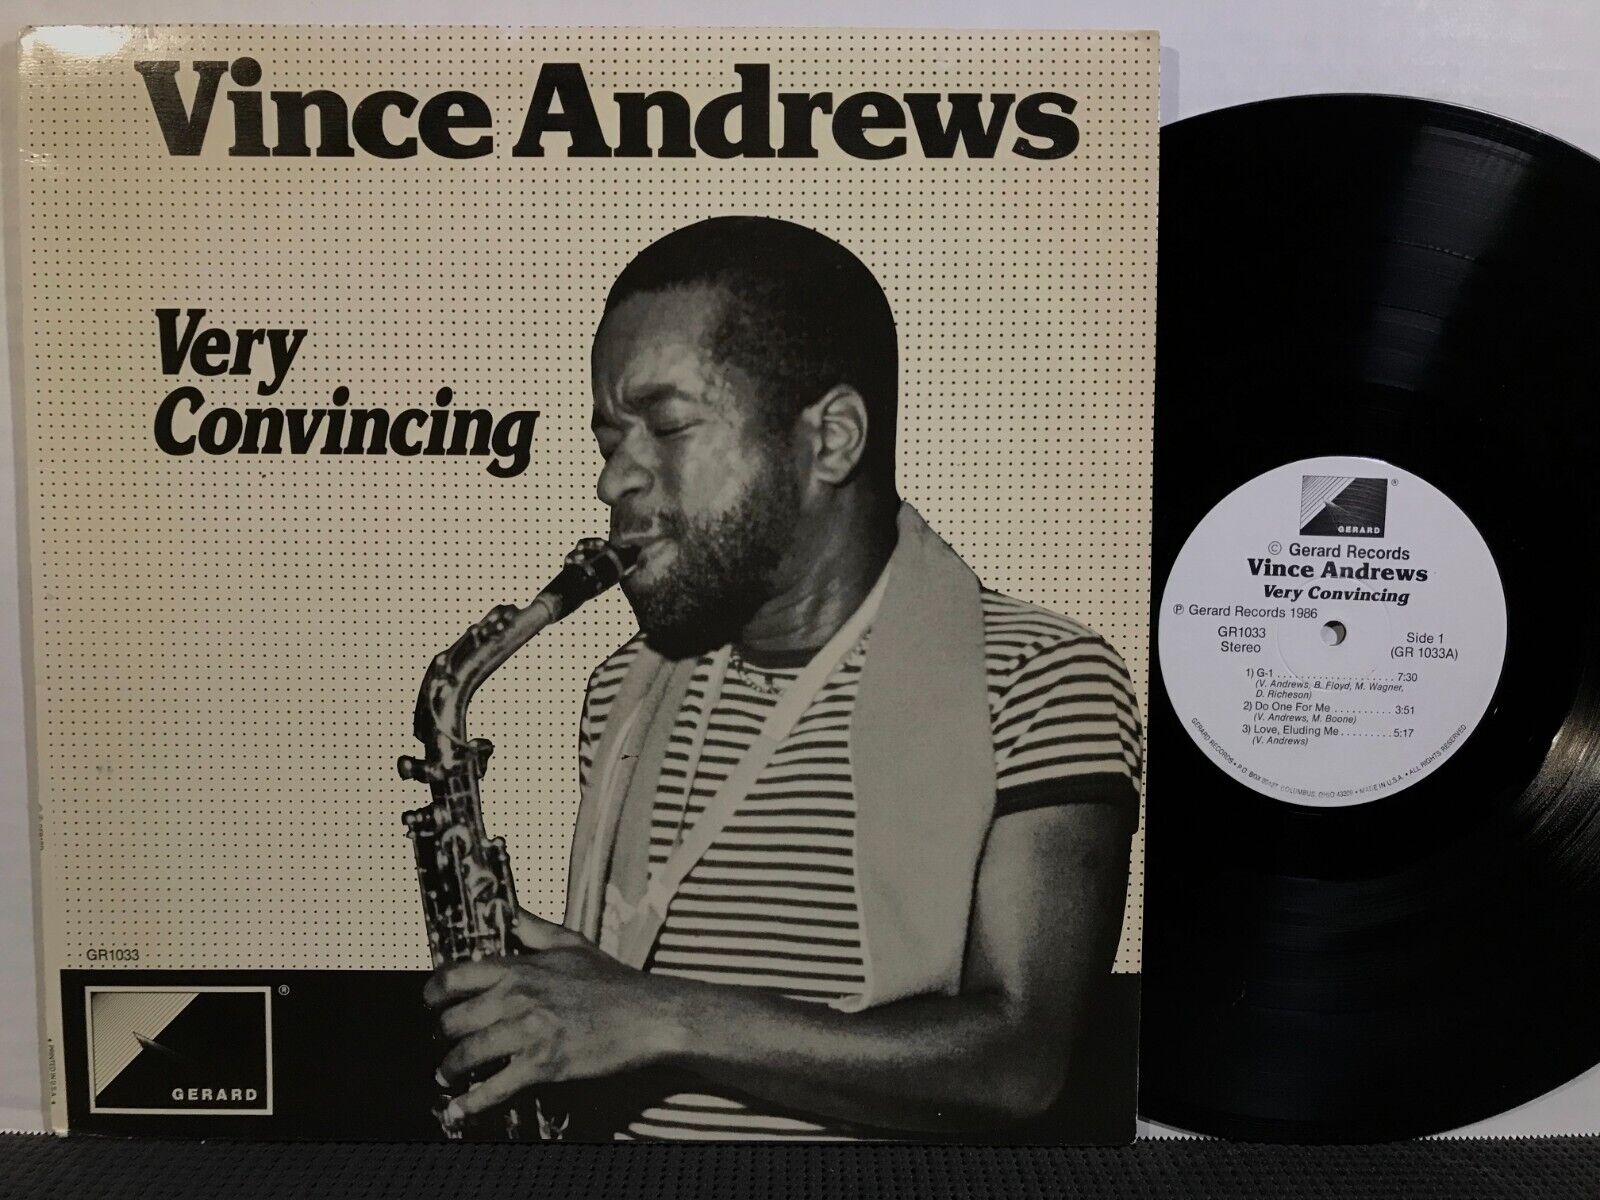 VINCE ANDREWS Very Convincing LP GERARD RECORDS STEREO 1986 Private Jazz Funk